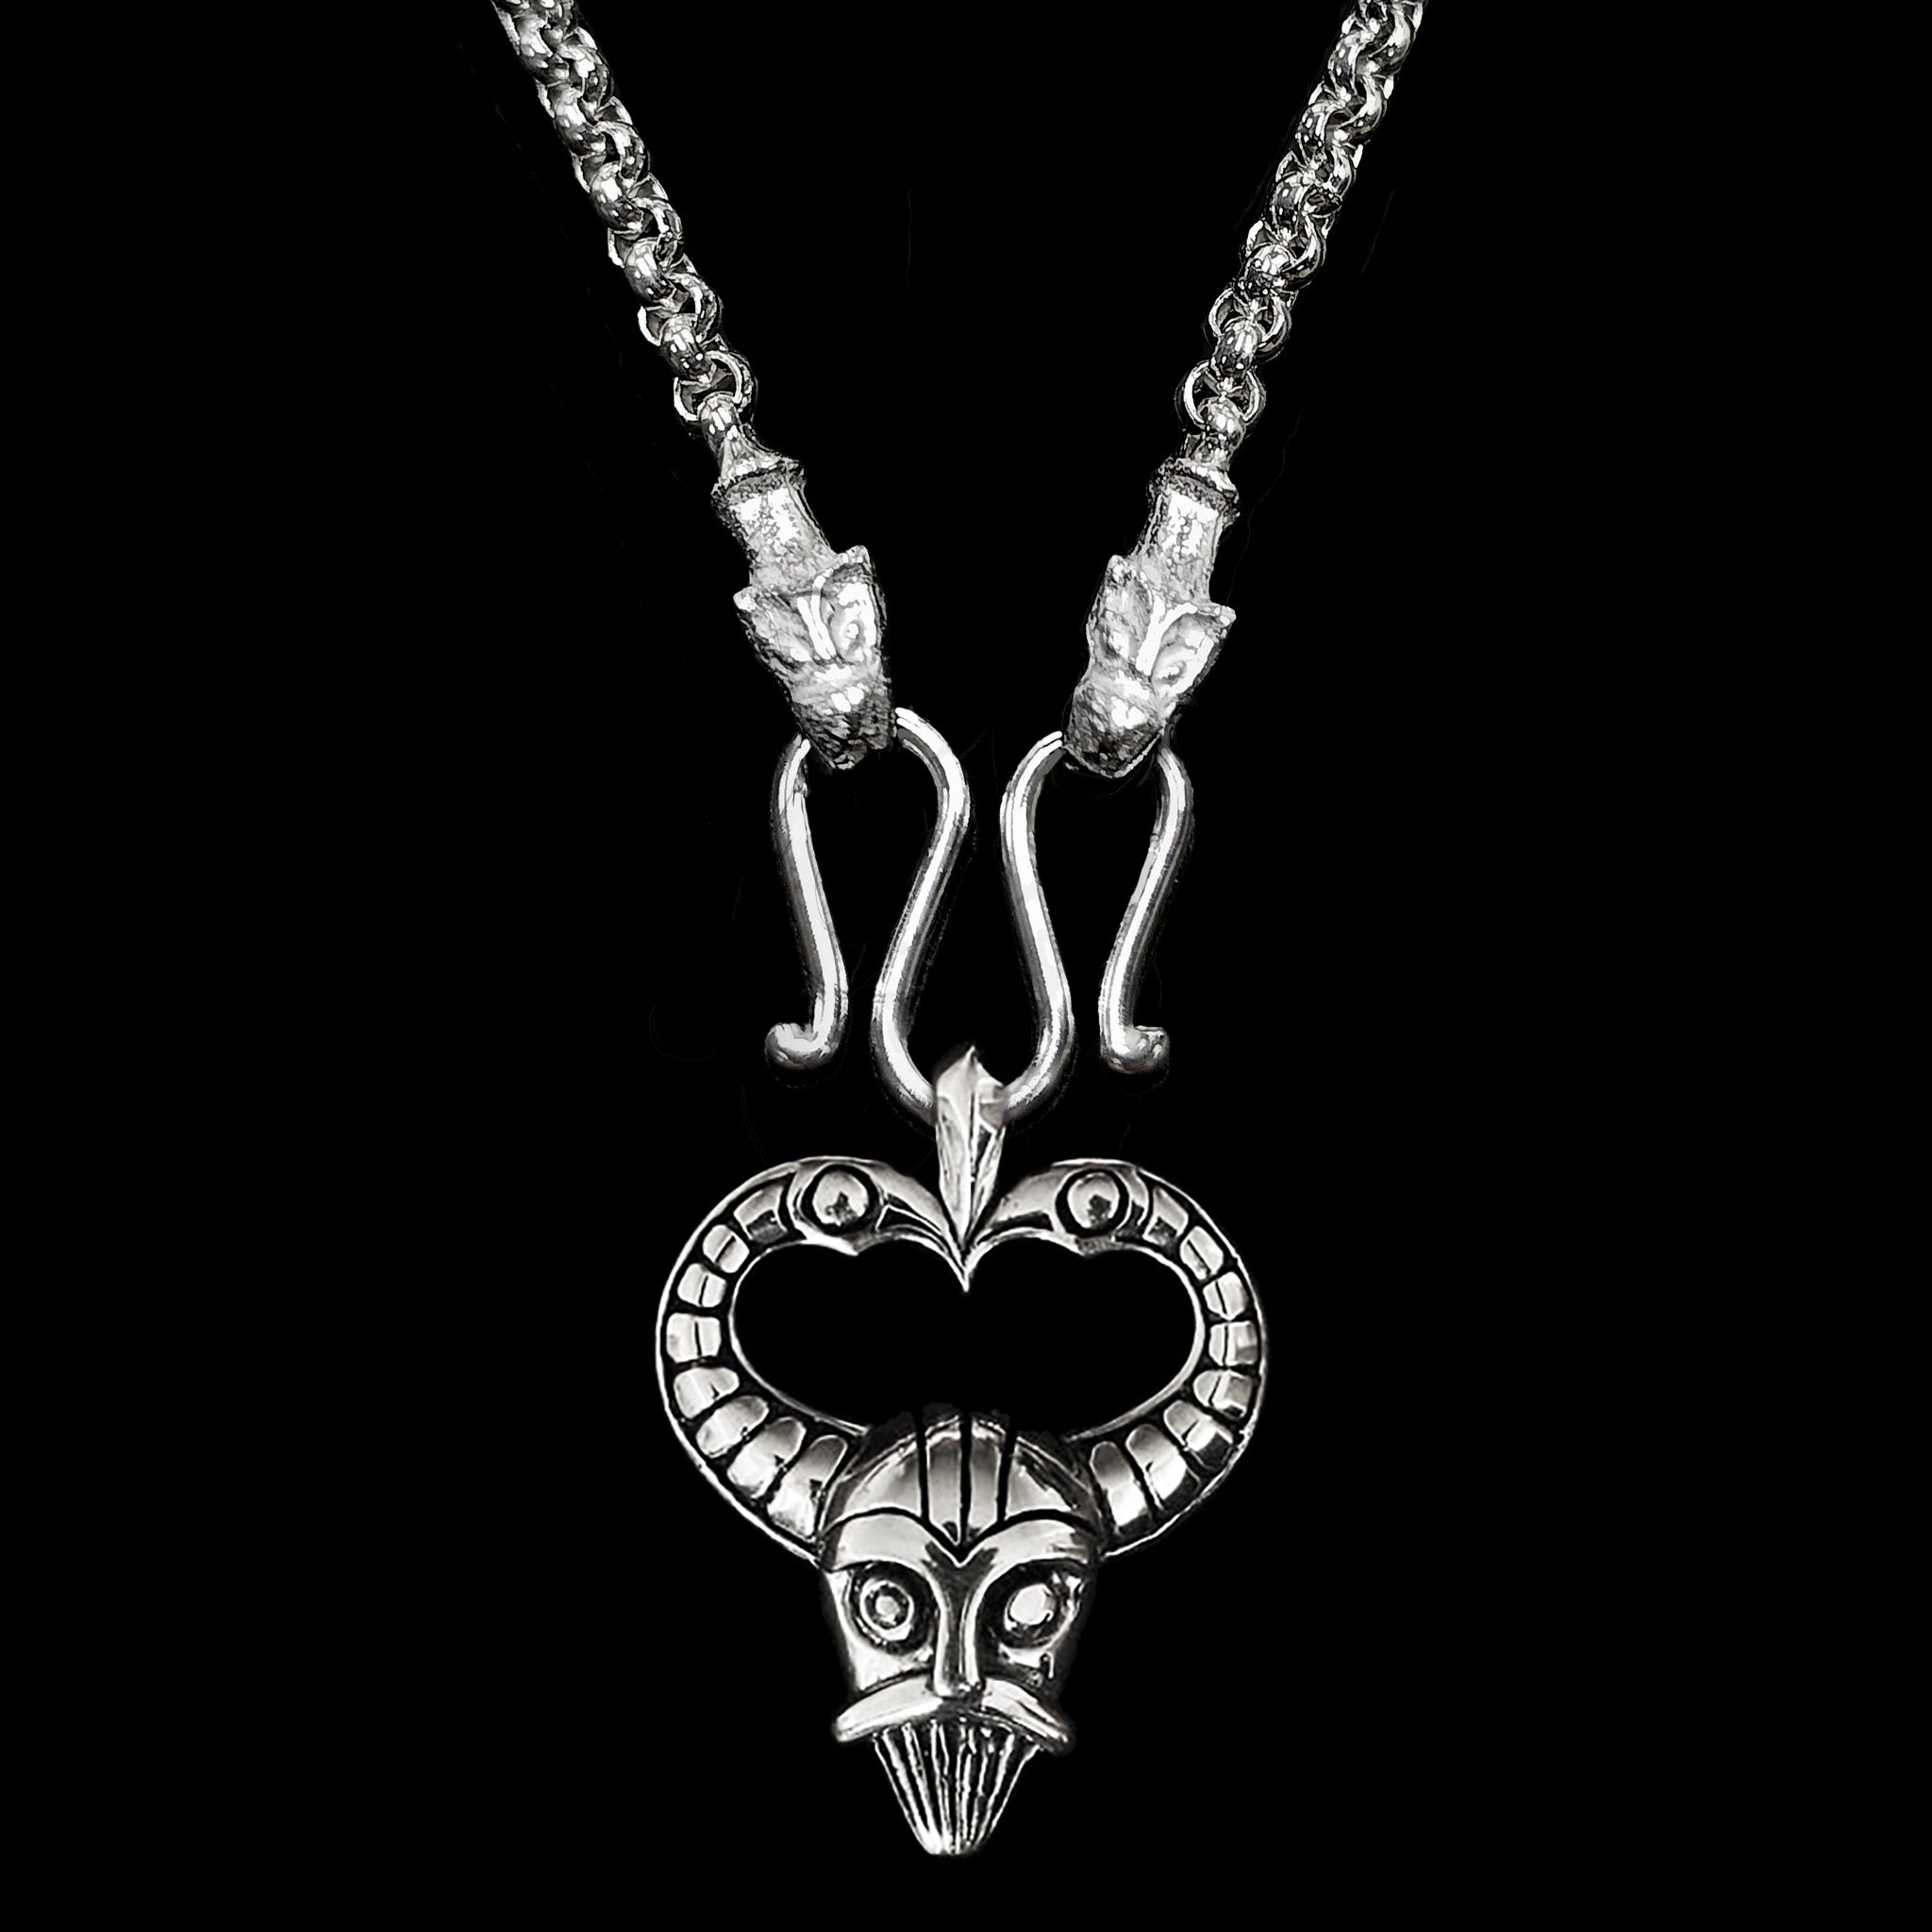 Slim Silver Anchor Chain Pendant Necklace with Icelandic Wolf Heads with Odin Protection Mask Pendant